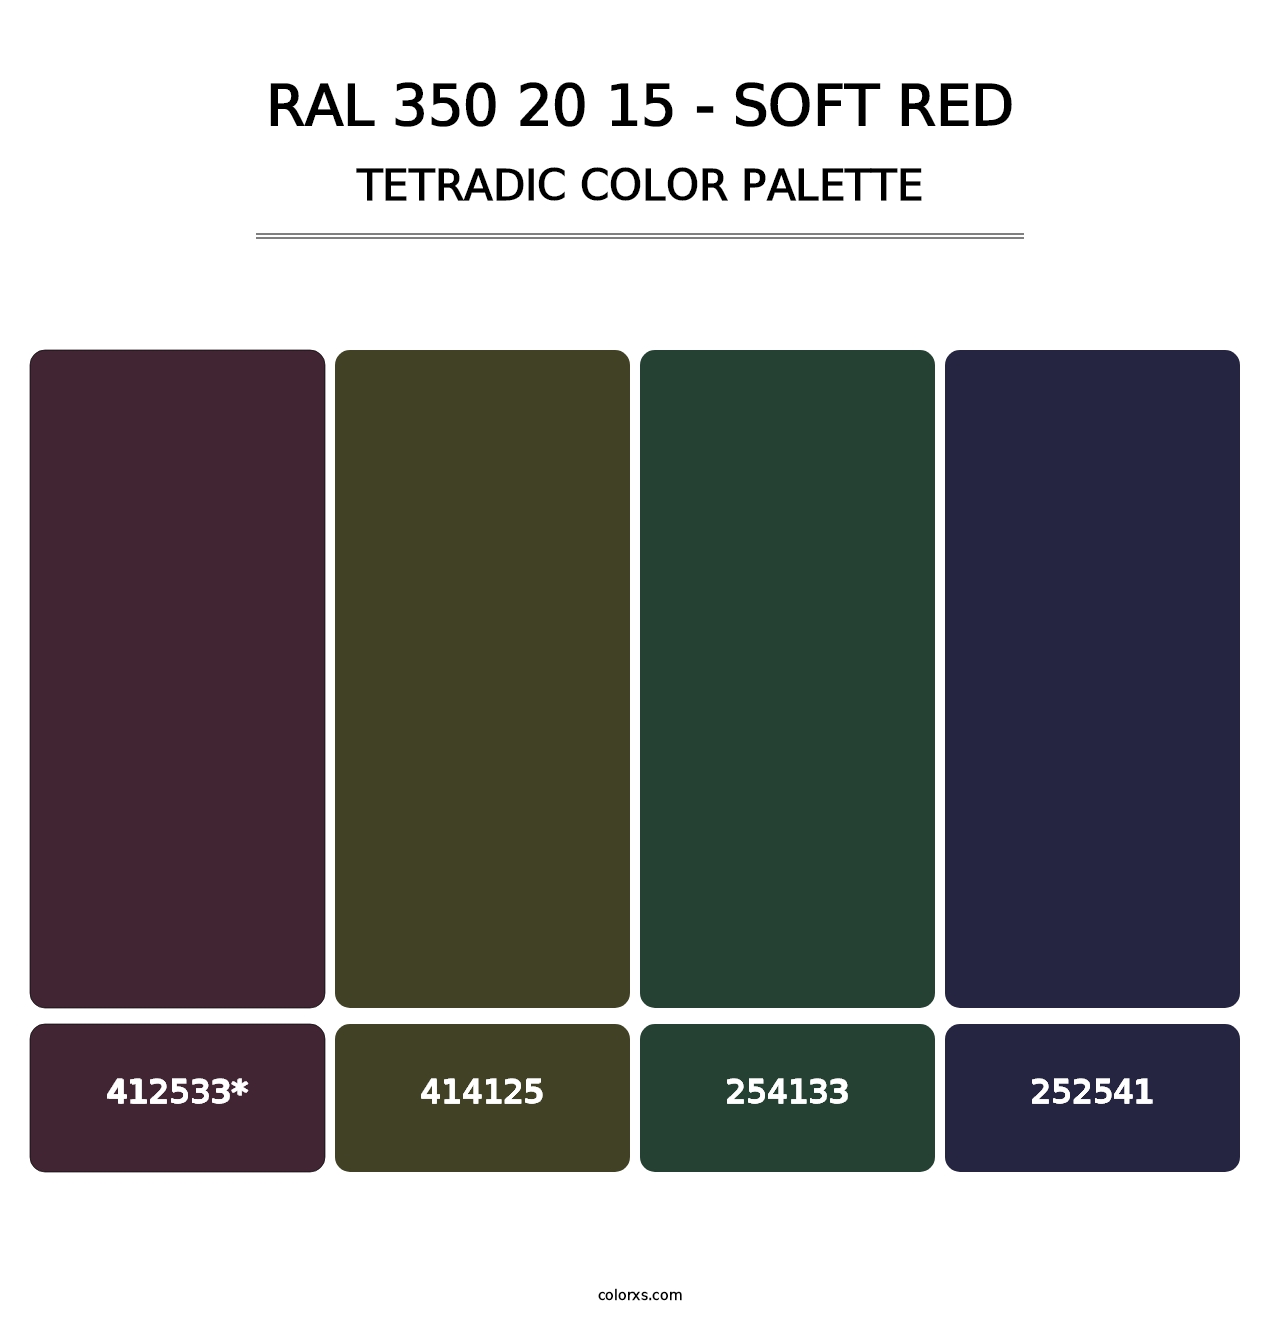 RAL 350 20 15 - Soft Red - Tetradic Color Palette